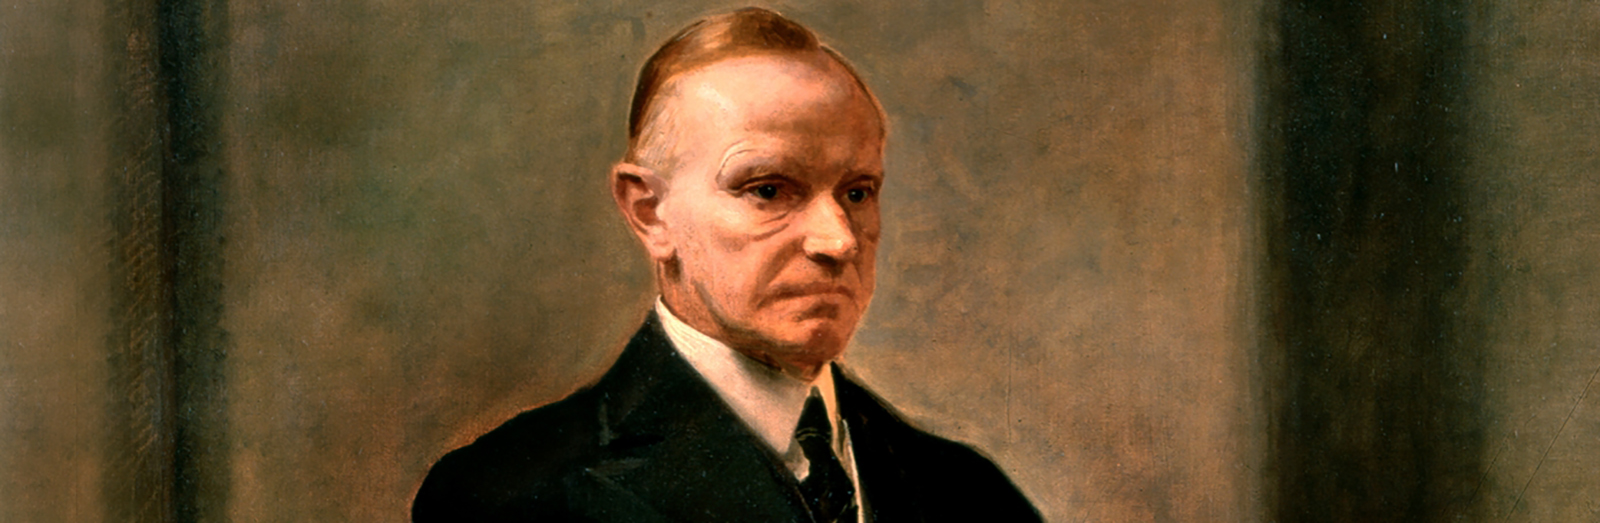 Cropped portrait of President Calvin Coolidge